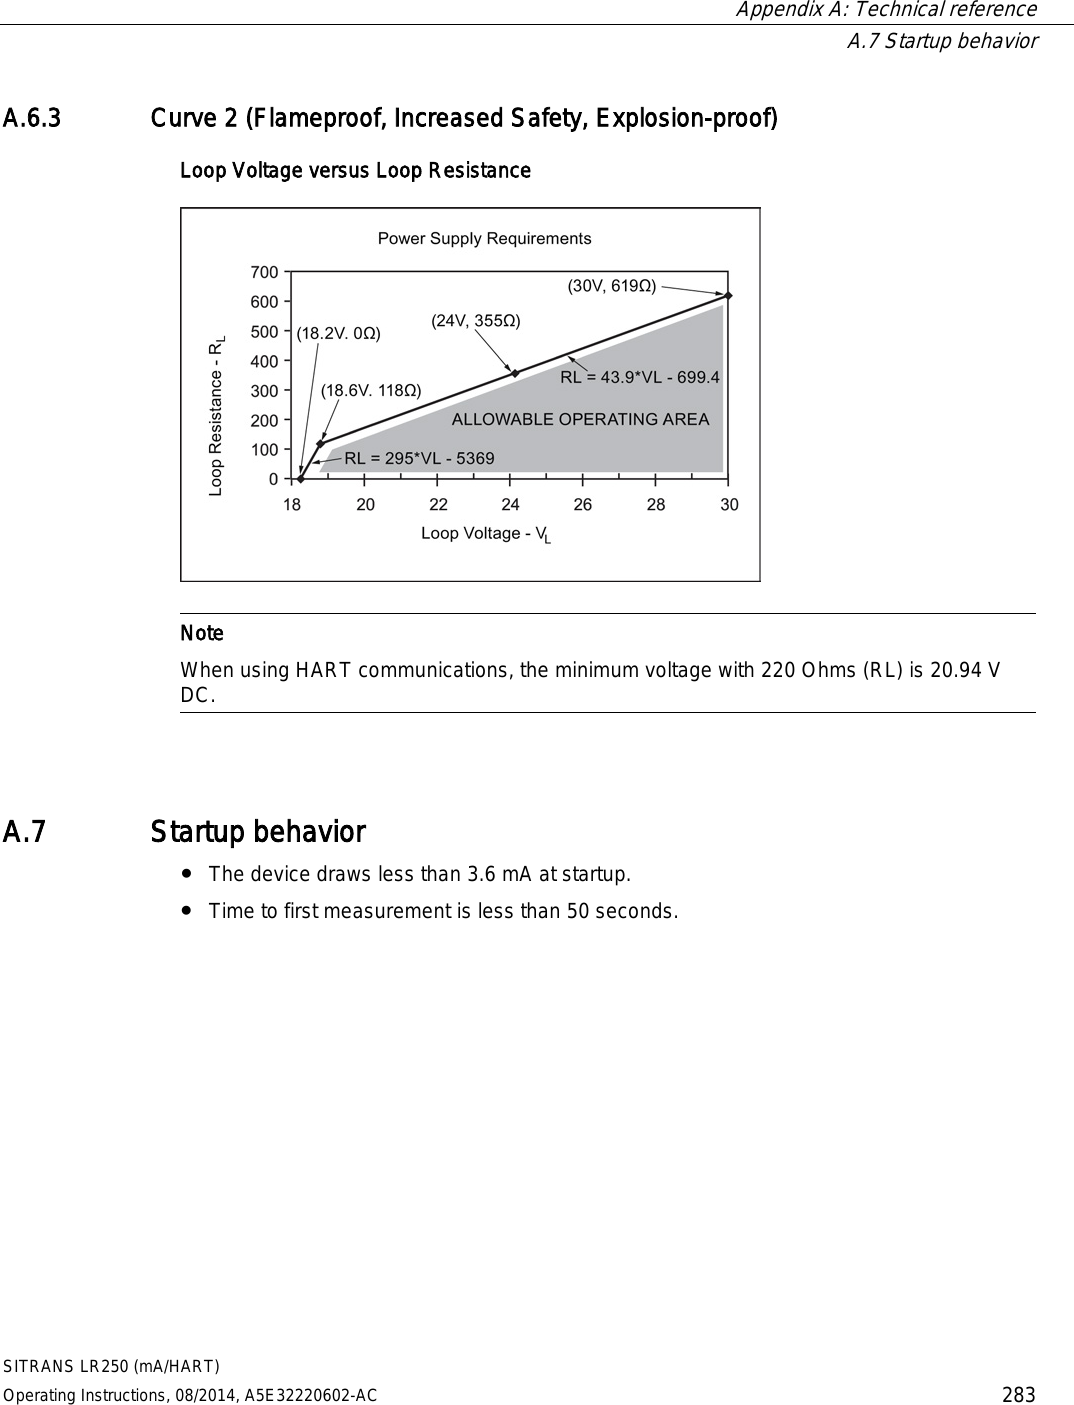  Appendix A: Technical reference  A.7 Startup behavior SITRANS LR250 (mA/HART) Operating Instructions, 08/2014, A5E32220602-AC 283 A.6.3 Curve 2 (Flameproof, Increased Safety, Explosion-proof) Loop Voltage versus Loop Resistance    Note When using HART communications, the minimum voltage with 220 Ohms (RL) is 20.94 V DC.  A.7 Startup behavior ● The device draws less than 3.6 mA at startup. ● Time to first measurement is less than 50 seconds. 